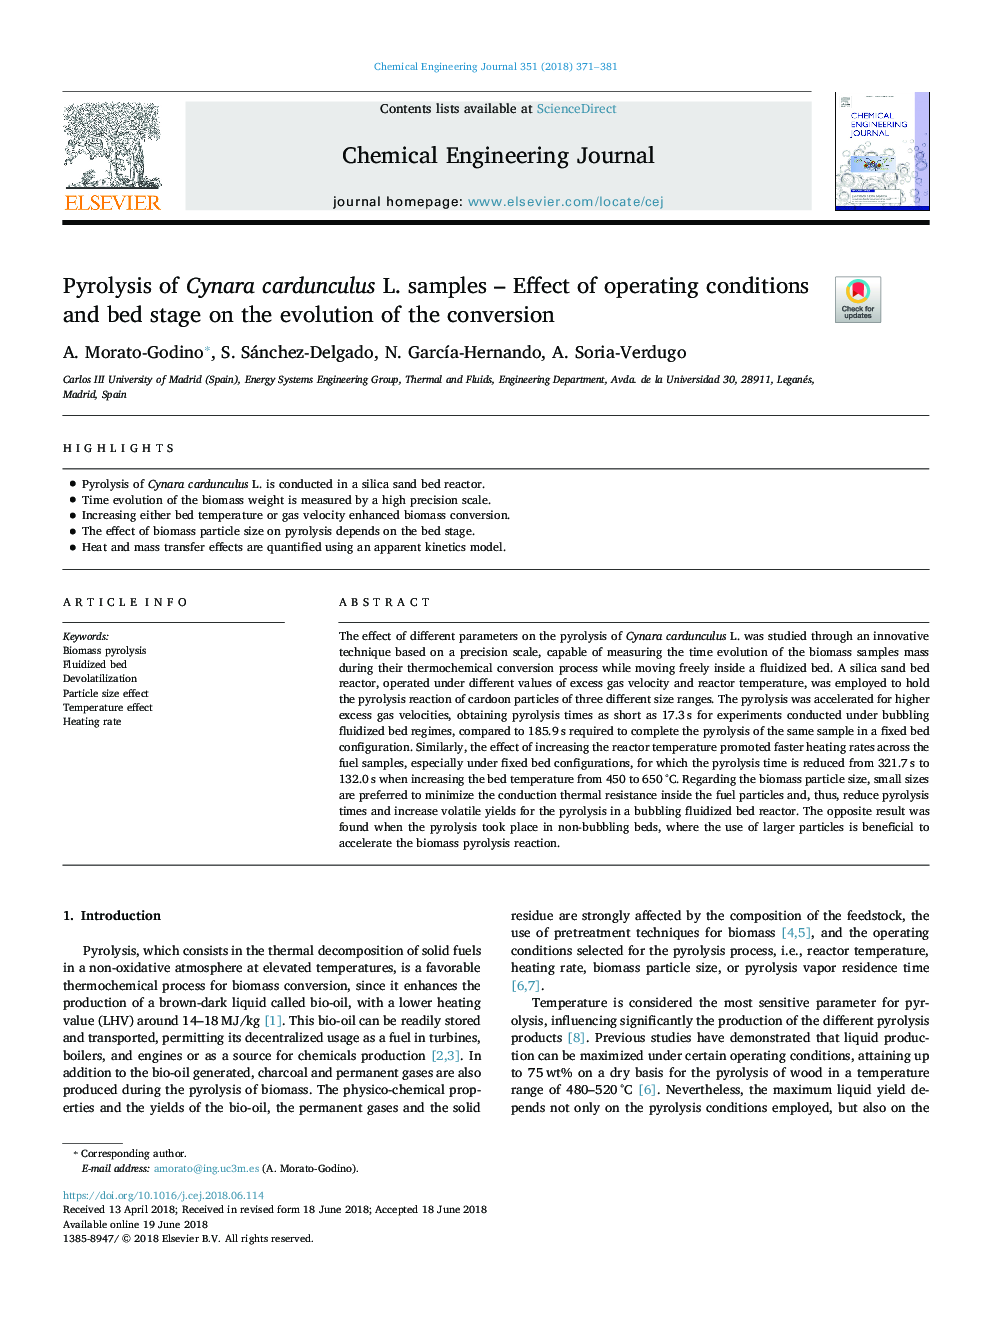 Pyrolysis of Cynara cardunculus L. samples - Effect of operating conditions and bed stage on the evolution of the conversion